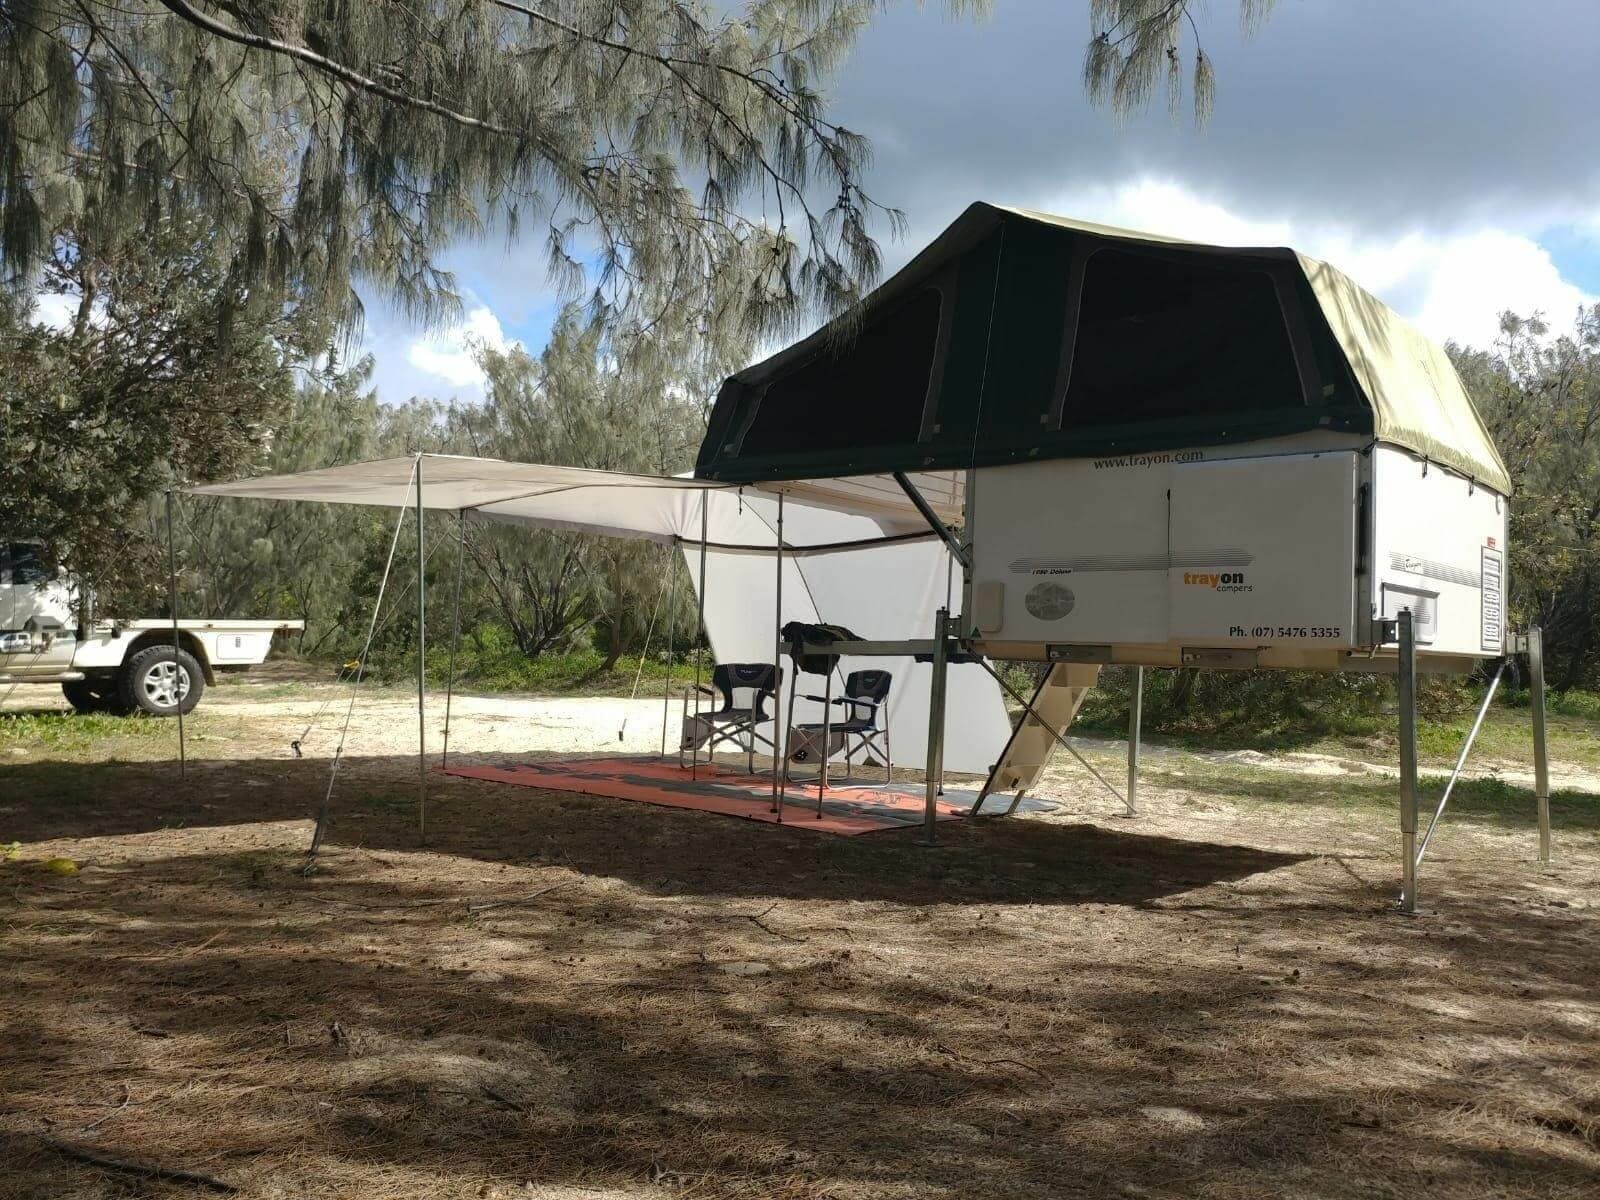 Trayon Fly Extension Camping under a Tree